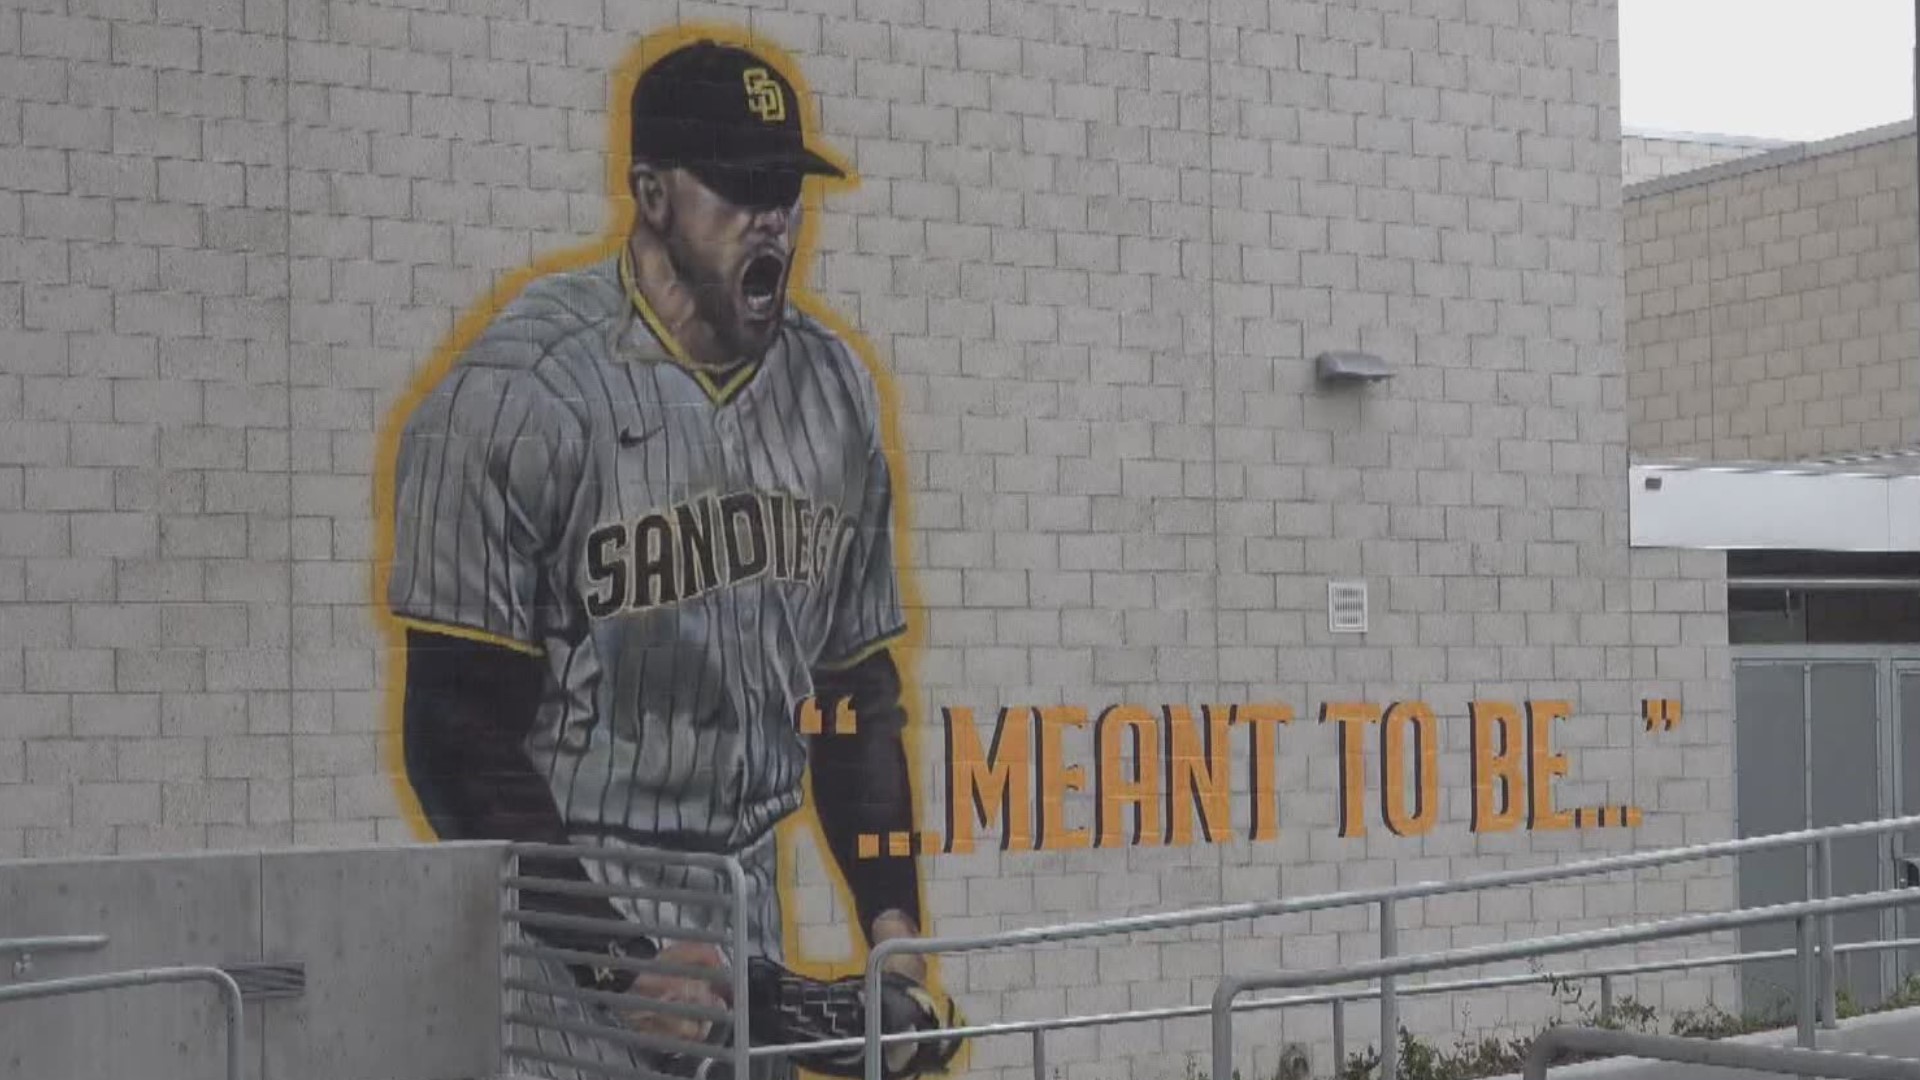 The mural immortalizes El Cajon’s own Joe Musgrove and his no-hitter, the first in franchise history for the San Diego Padres.